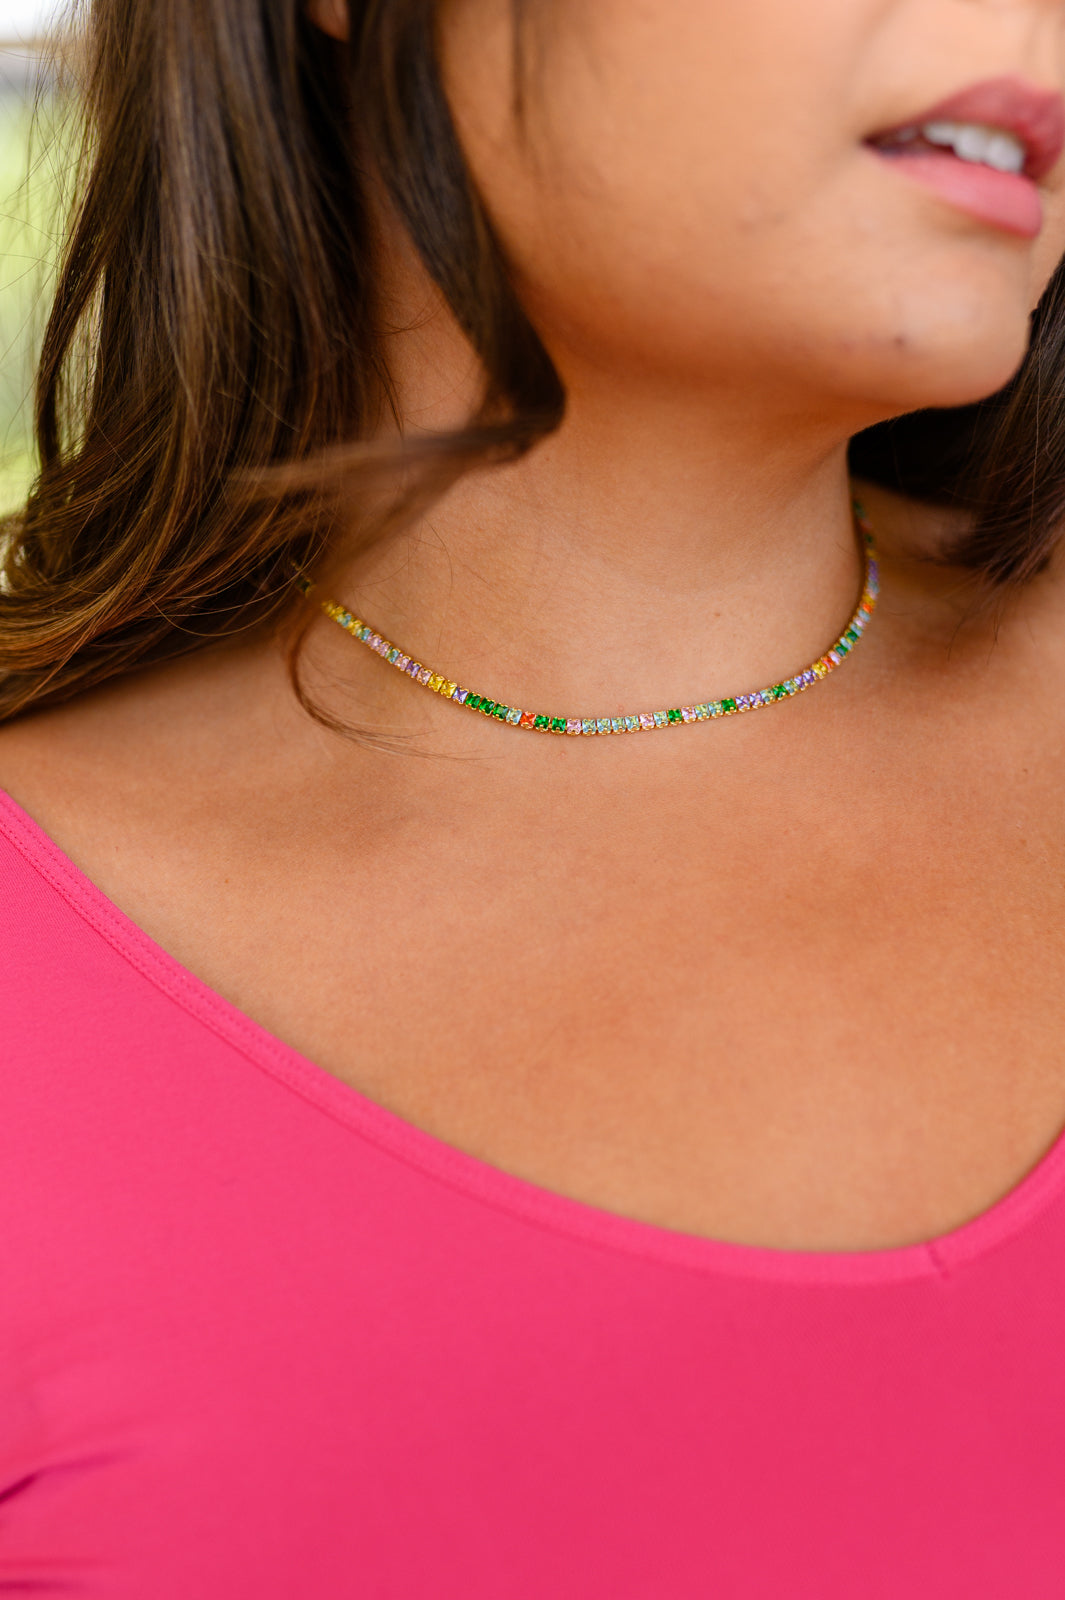 Waterproof Jewelry: The Promise Tennis Necklace